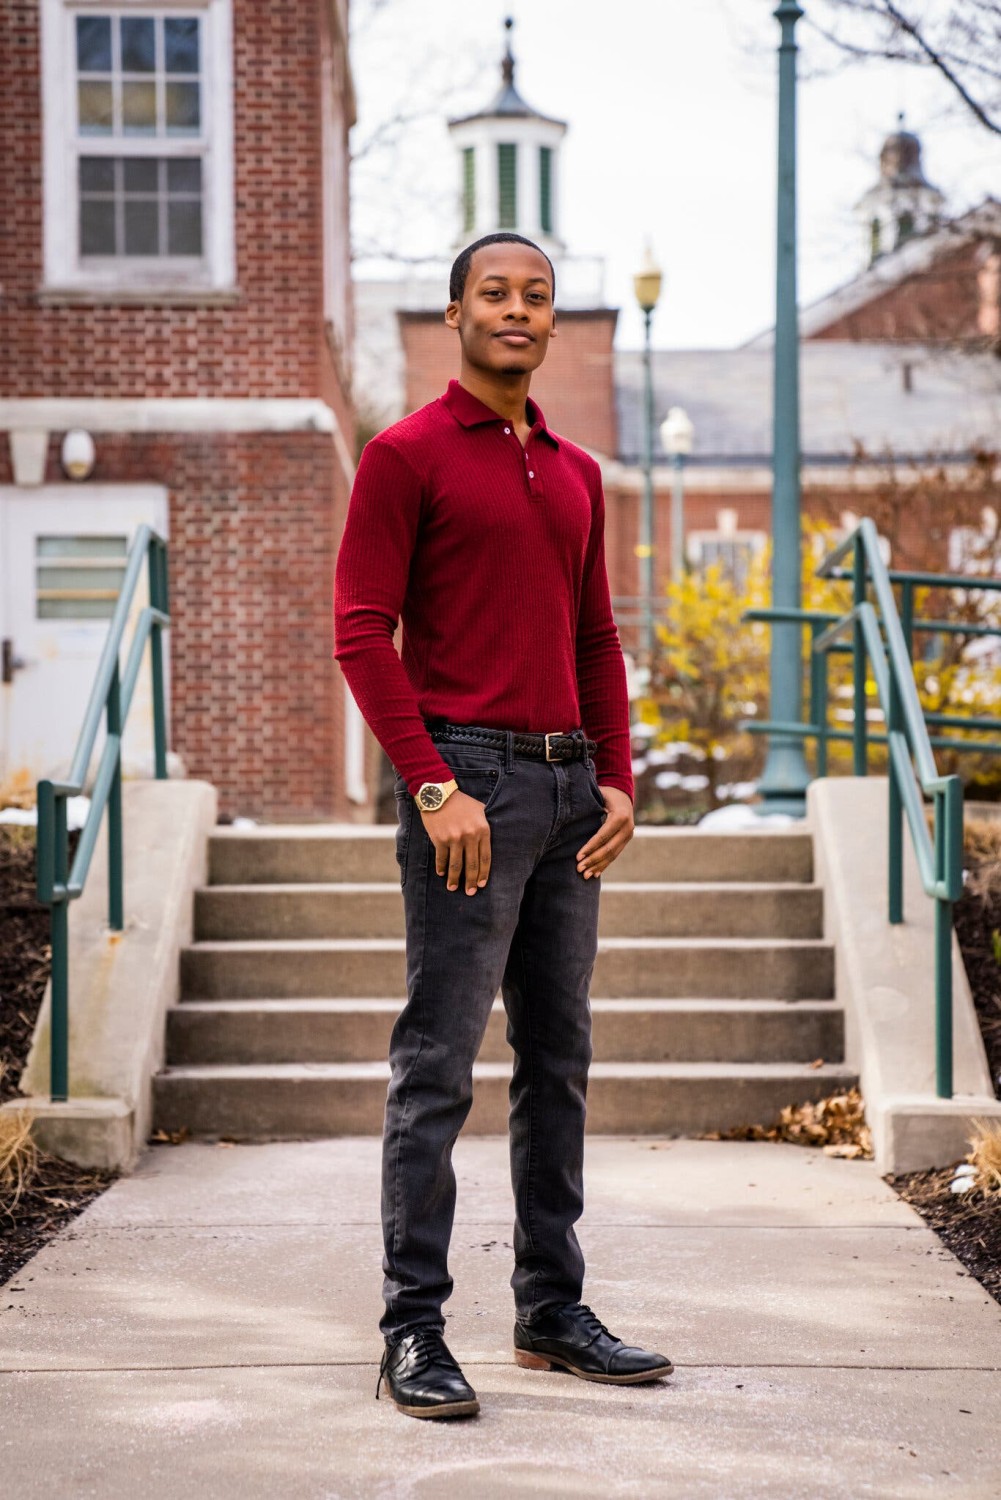 Jalaun Ross, a computer science major, applied for 200 internships but did not receive a single offer from tech firms.Credit...Joe Buglewicz for The New York Times